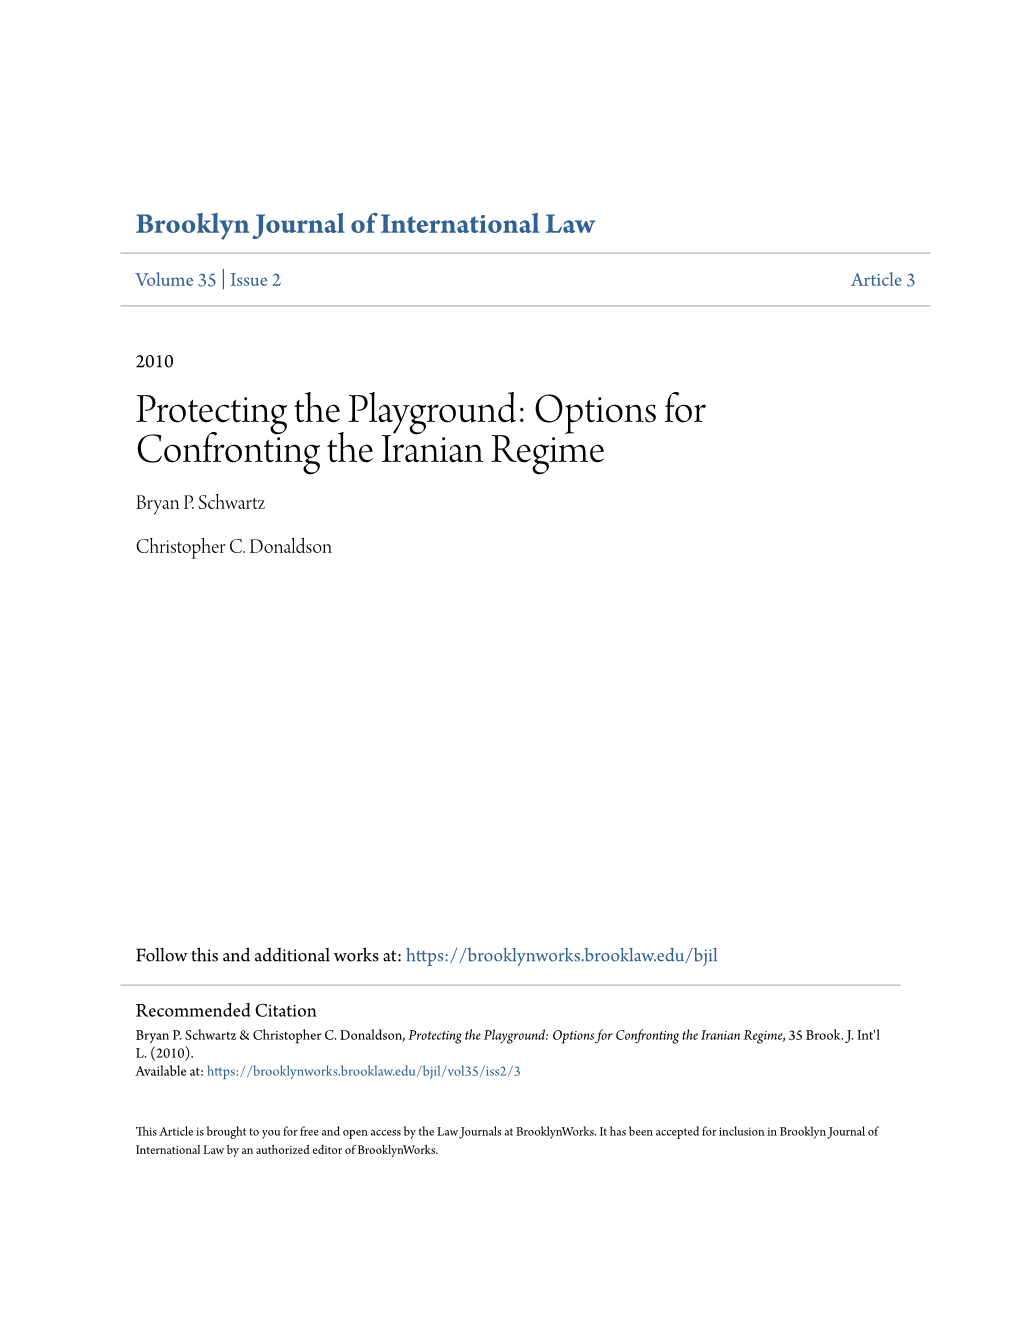 Protecting the Playground: Options for Confronting the Iranian Regime Bryan P